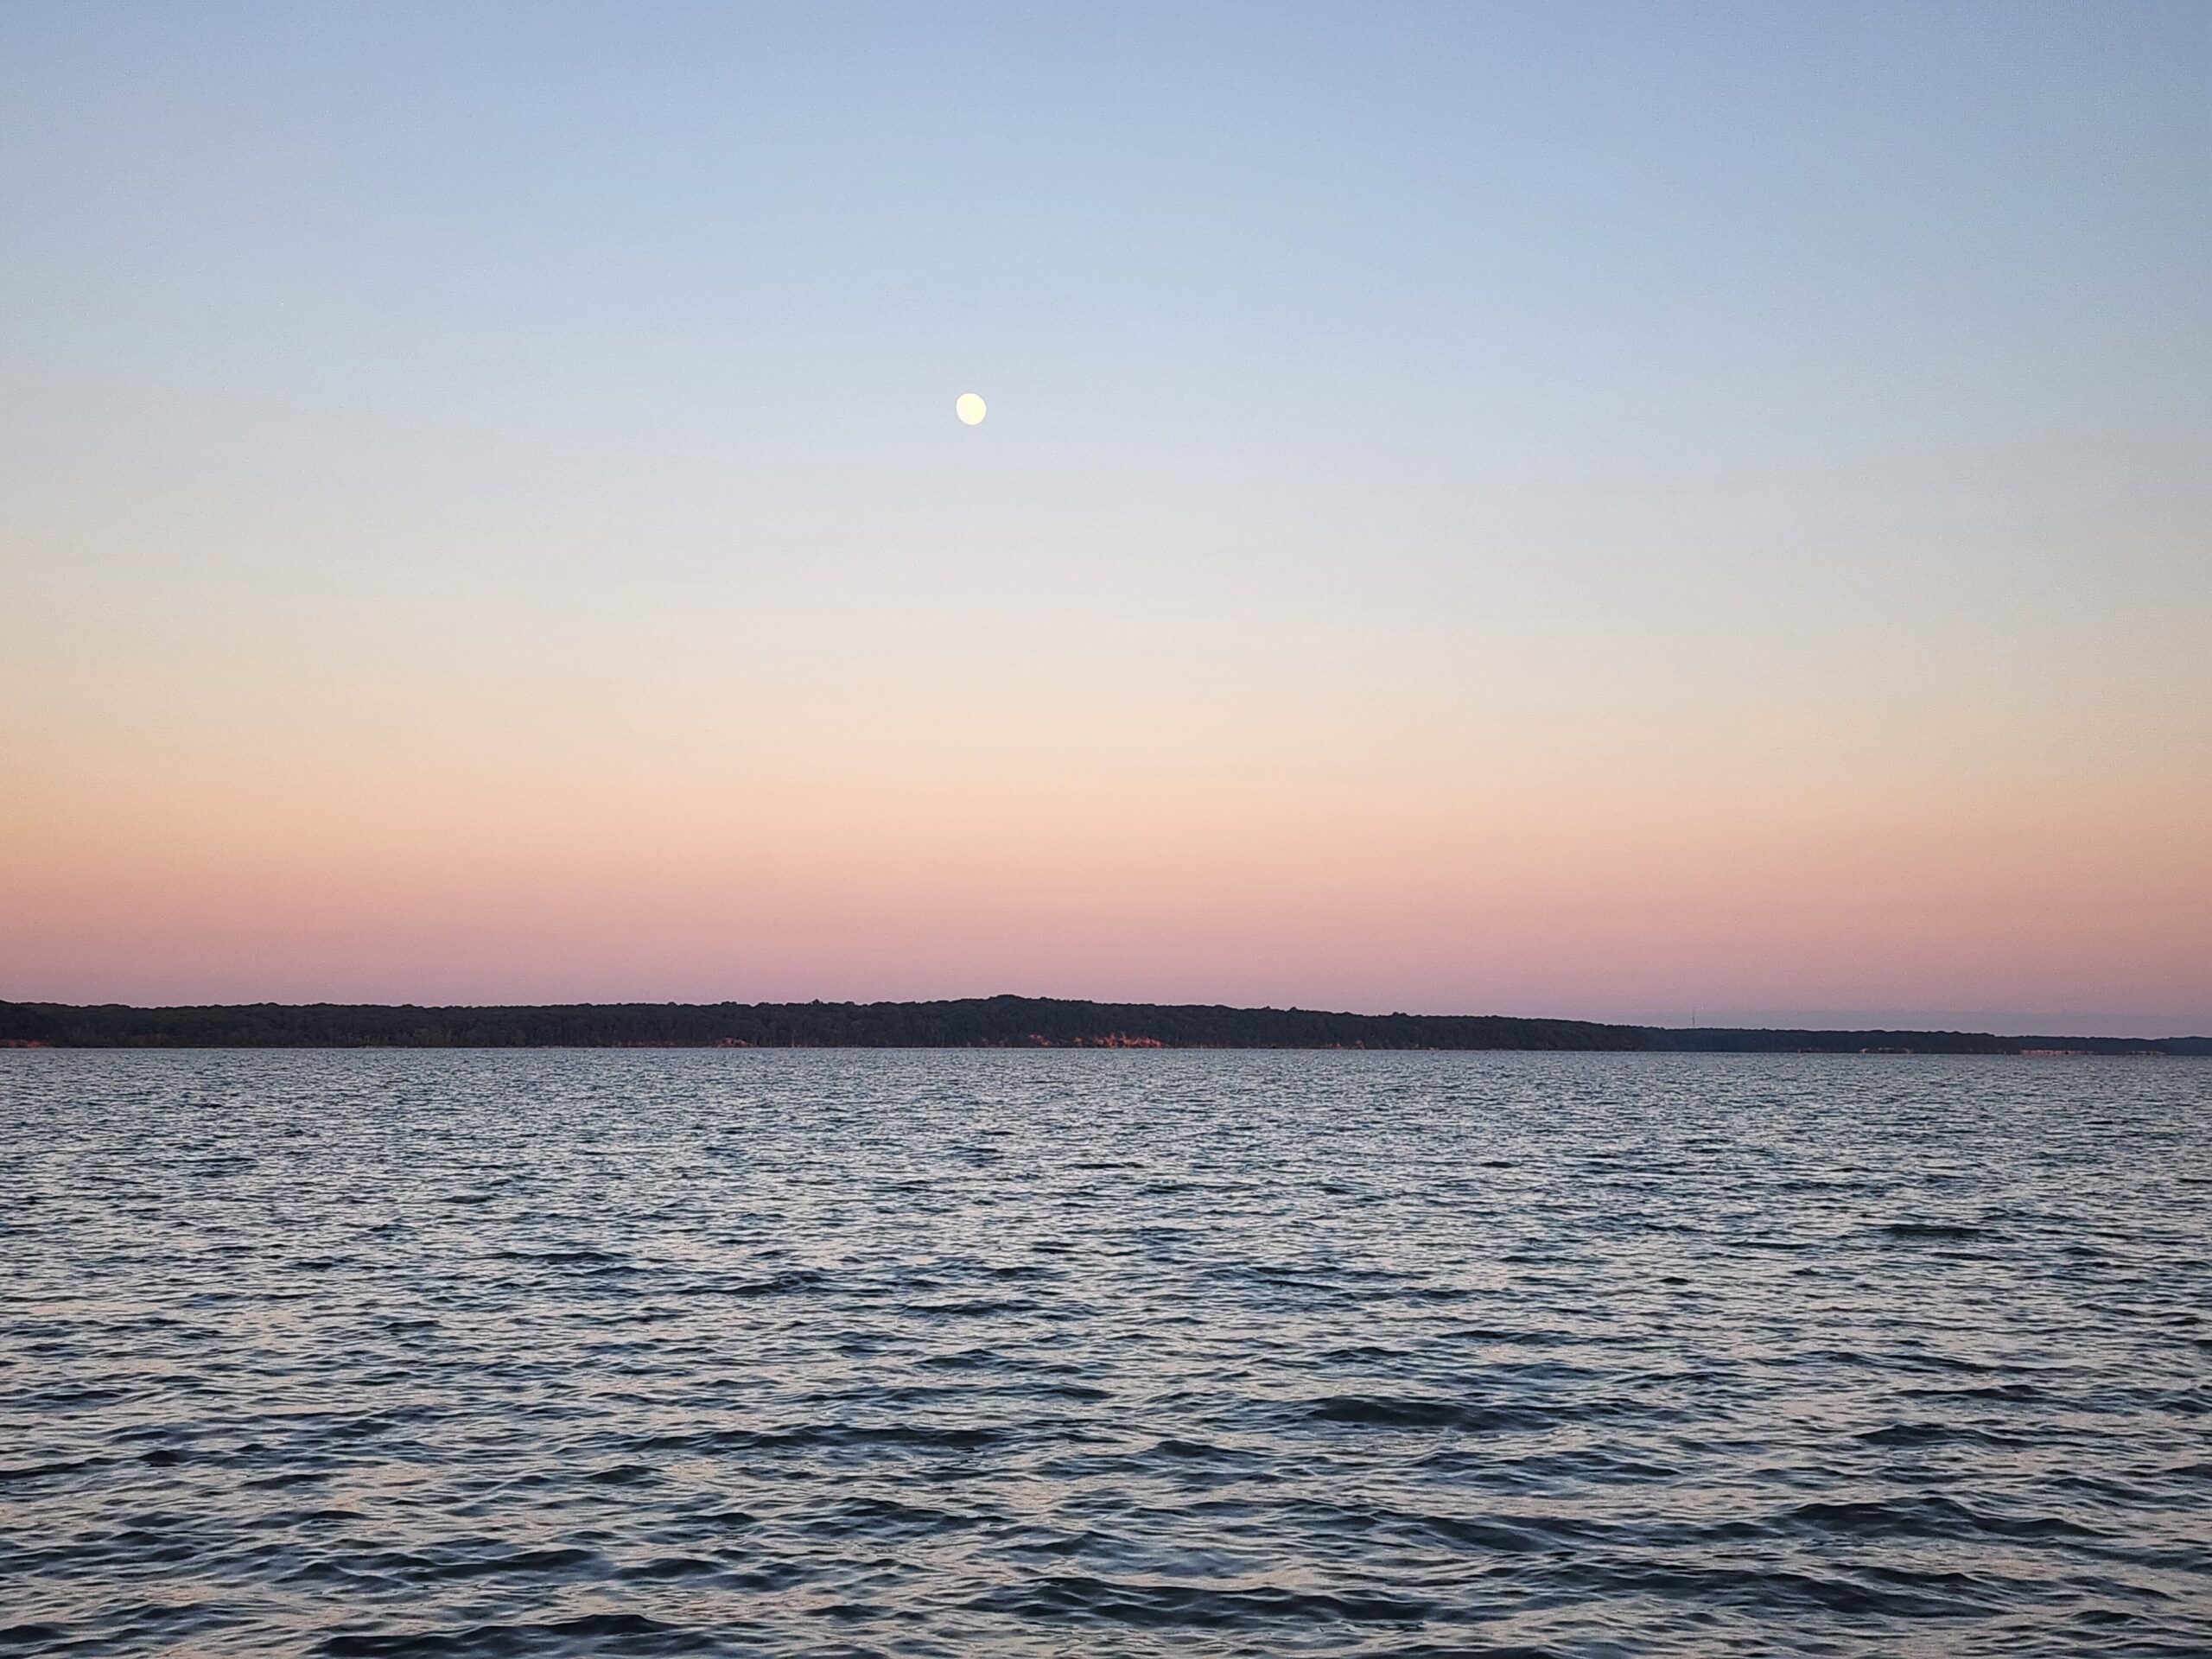 Essay | Water conservation in the Potomac River